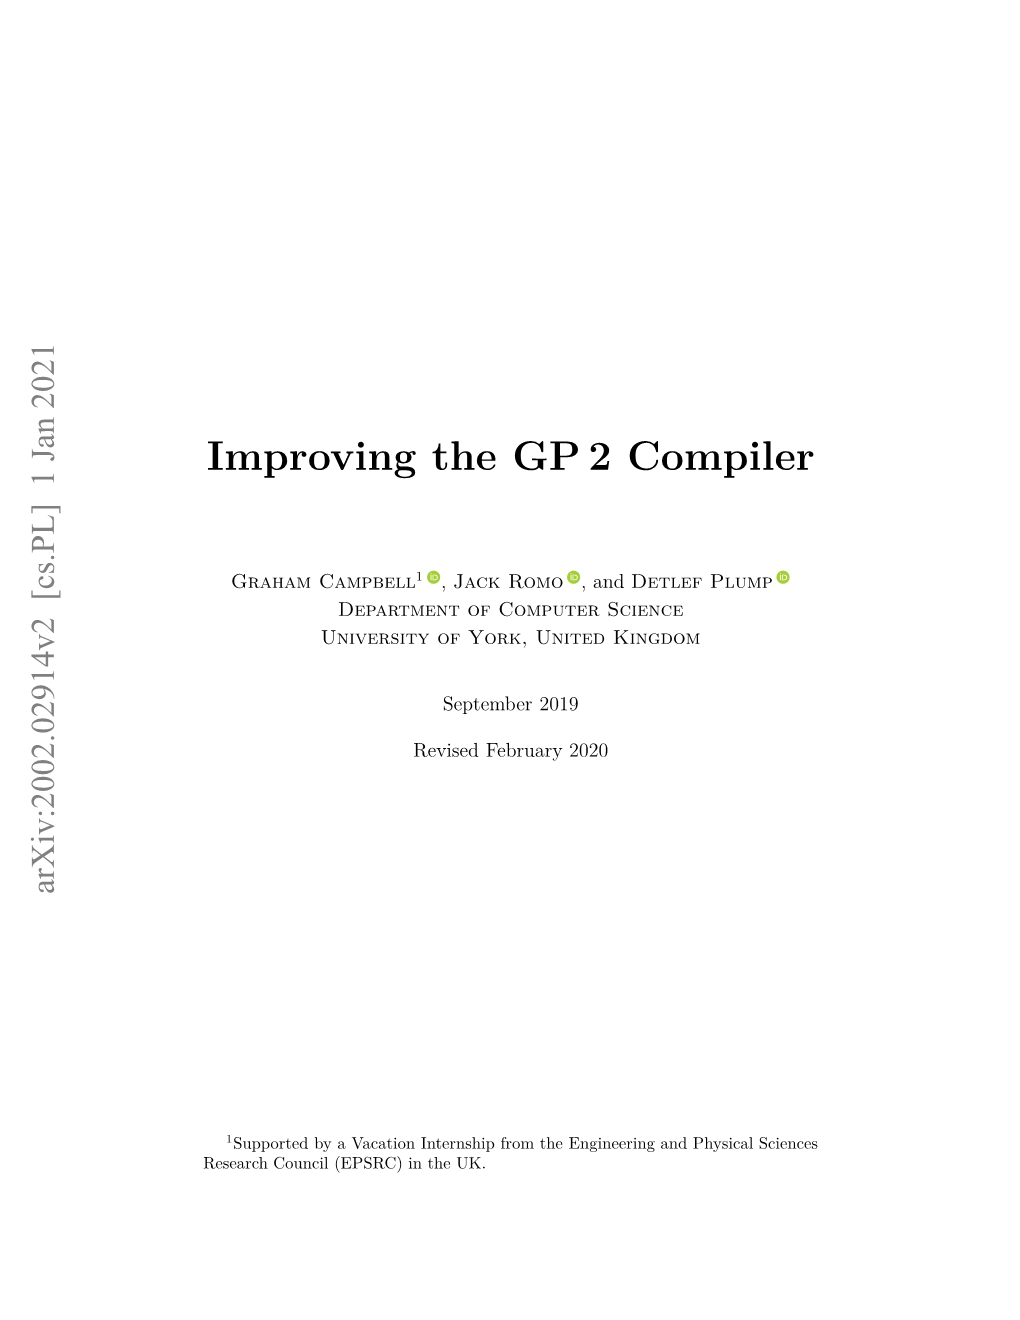 Improving the GP 2 Compiler